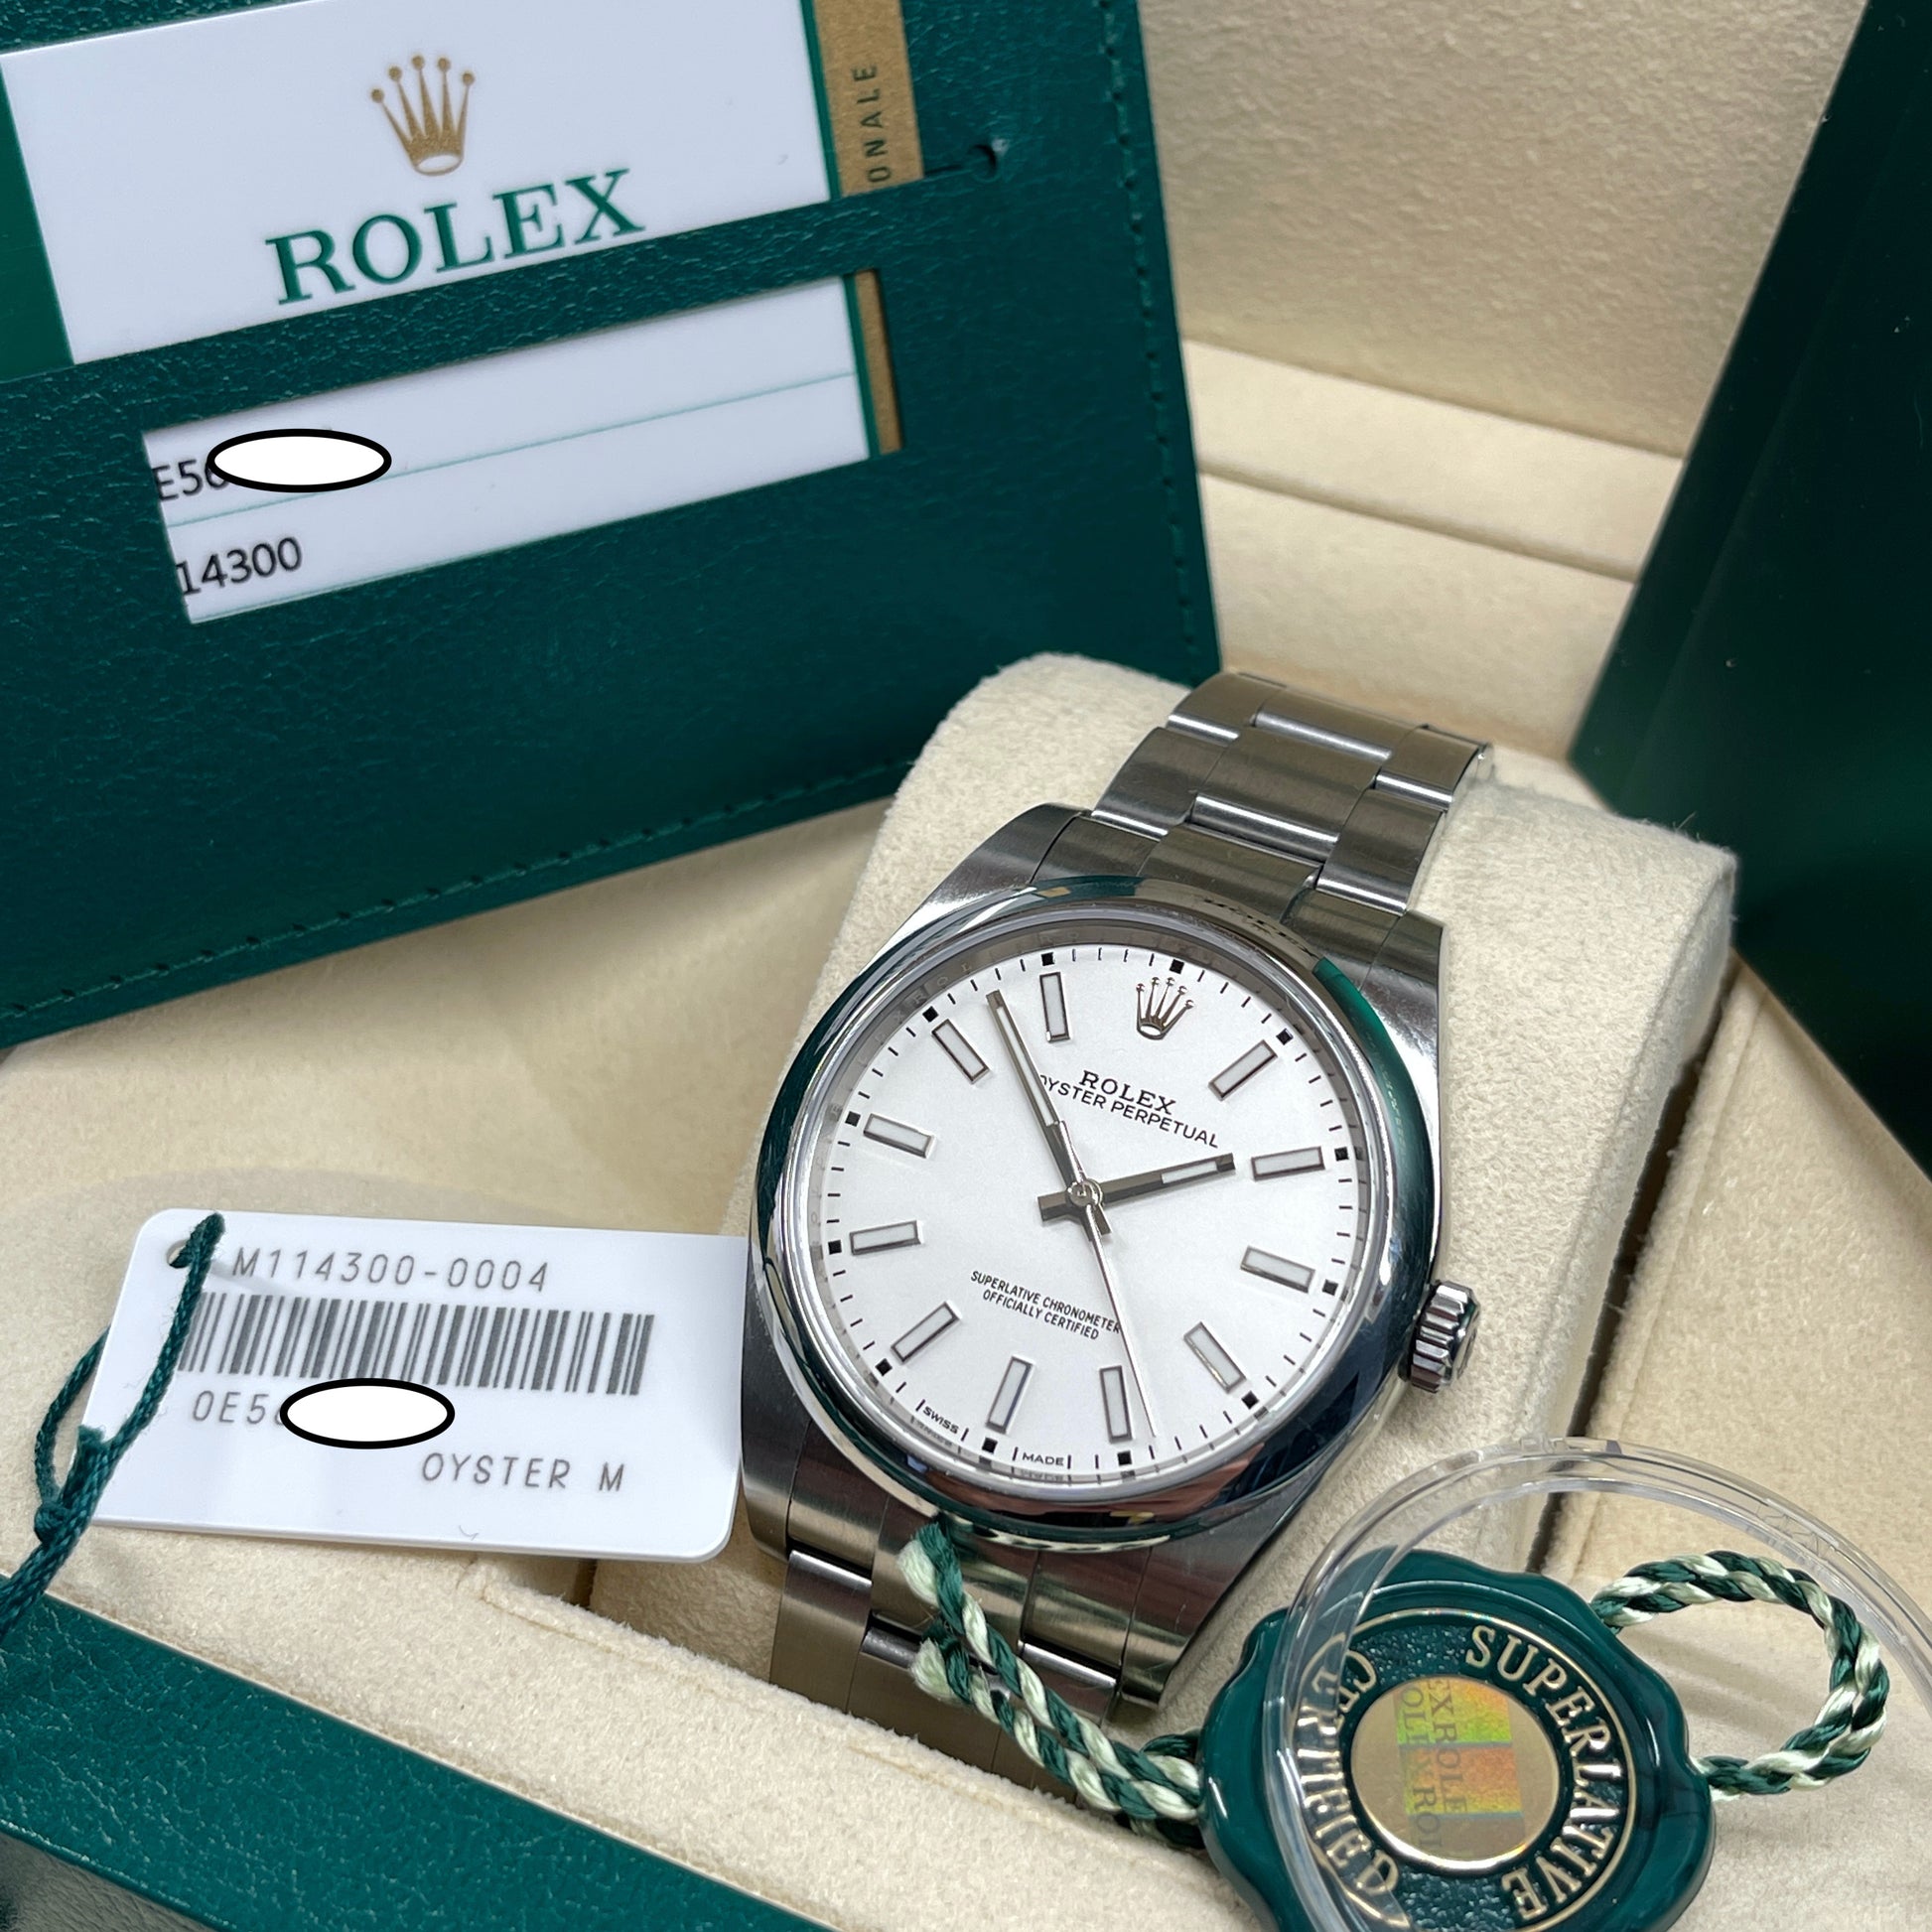 2019 Rolex Oyster Perpetual 114300 White 39mm Stainless Steel Wristwatch Box Papers - Hashtag Watch Company